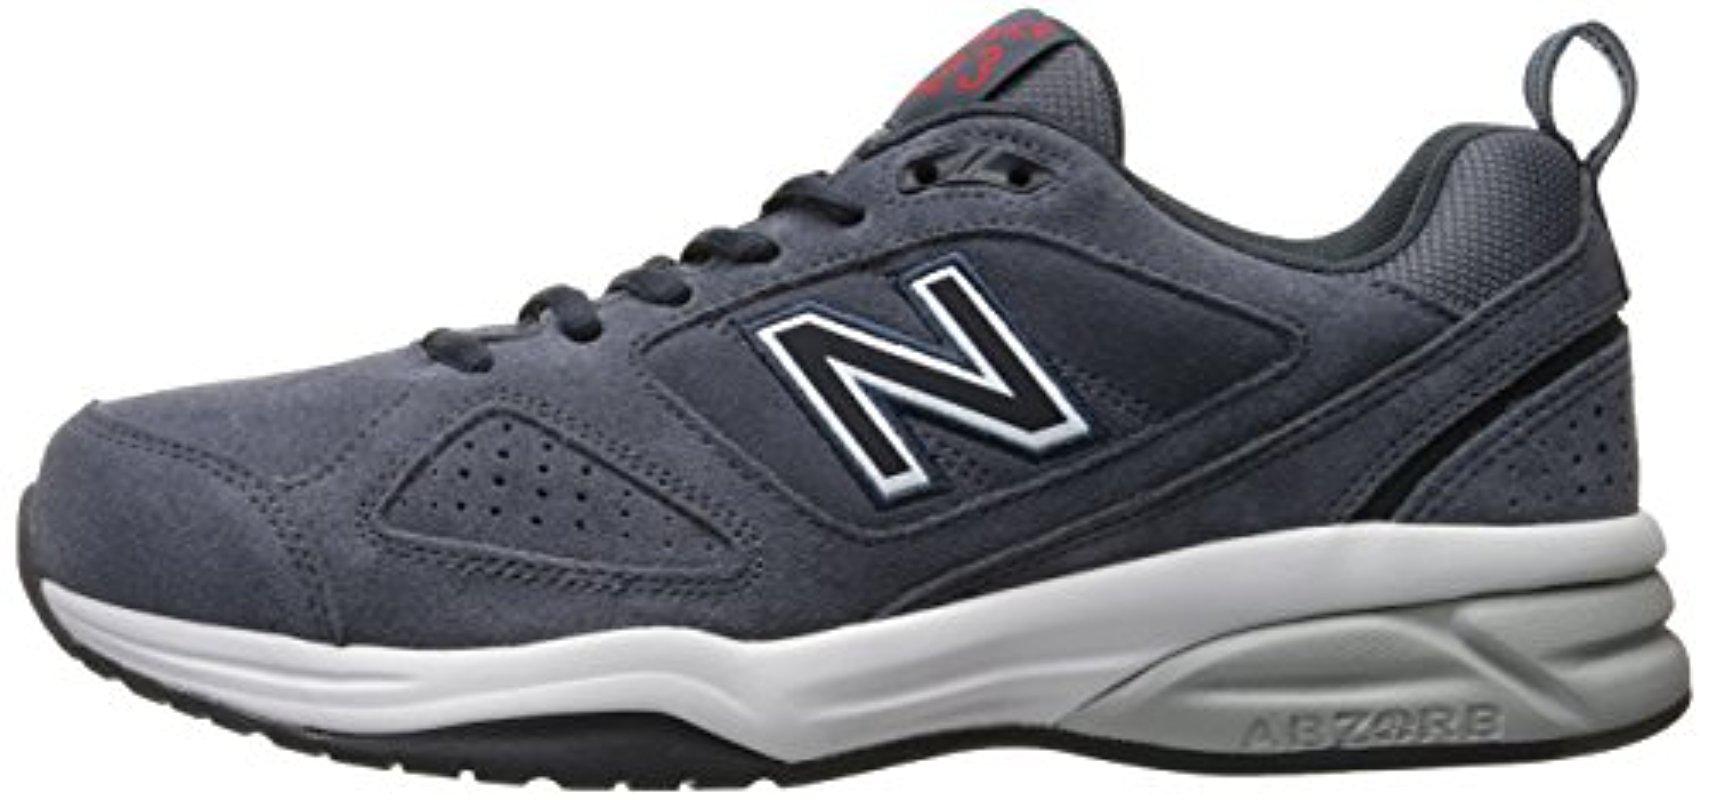 New Balance Suede Mx623v3 Training Shoe in Charcoal (Gray) for Men ...